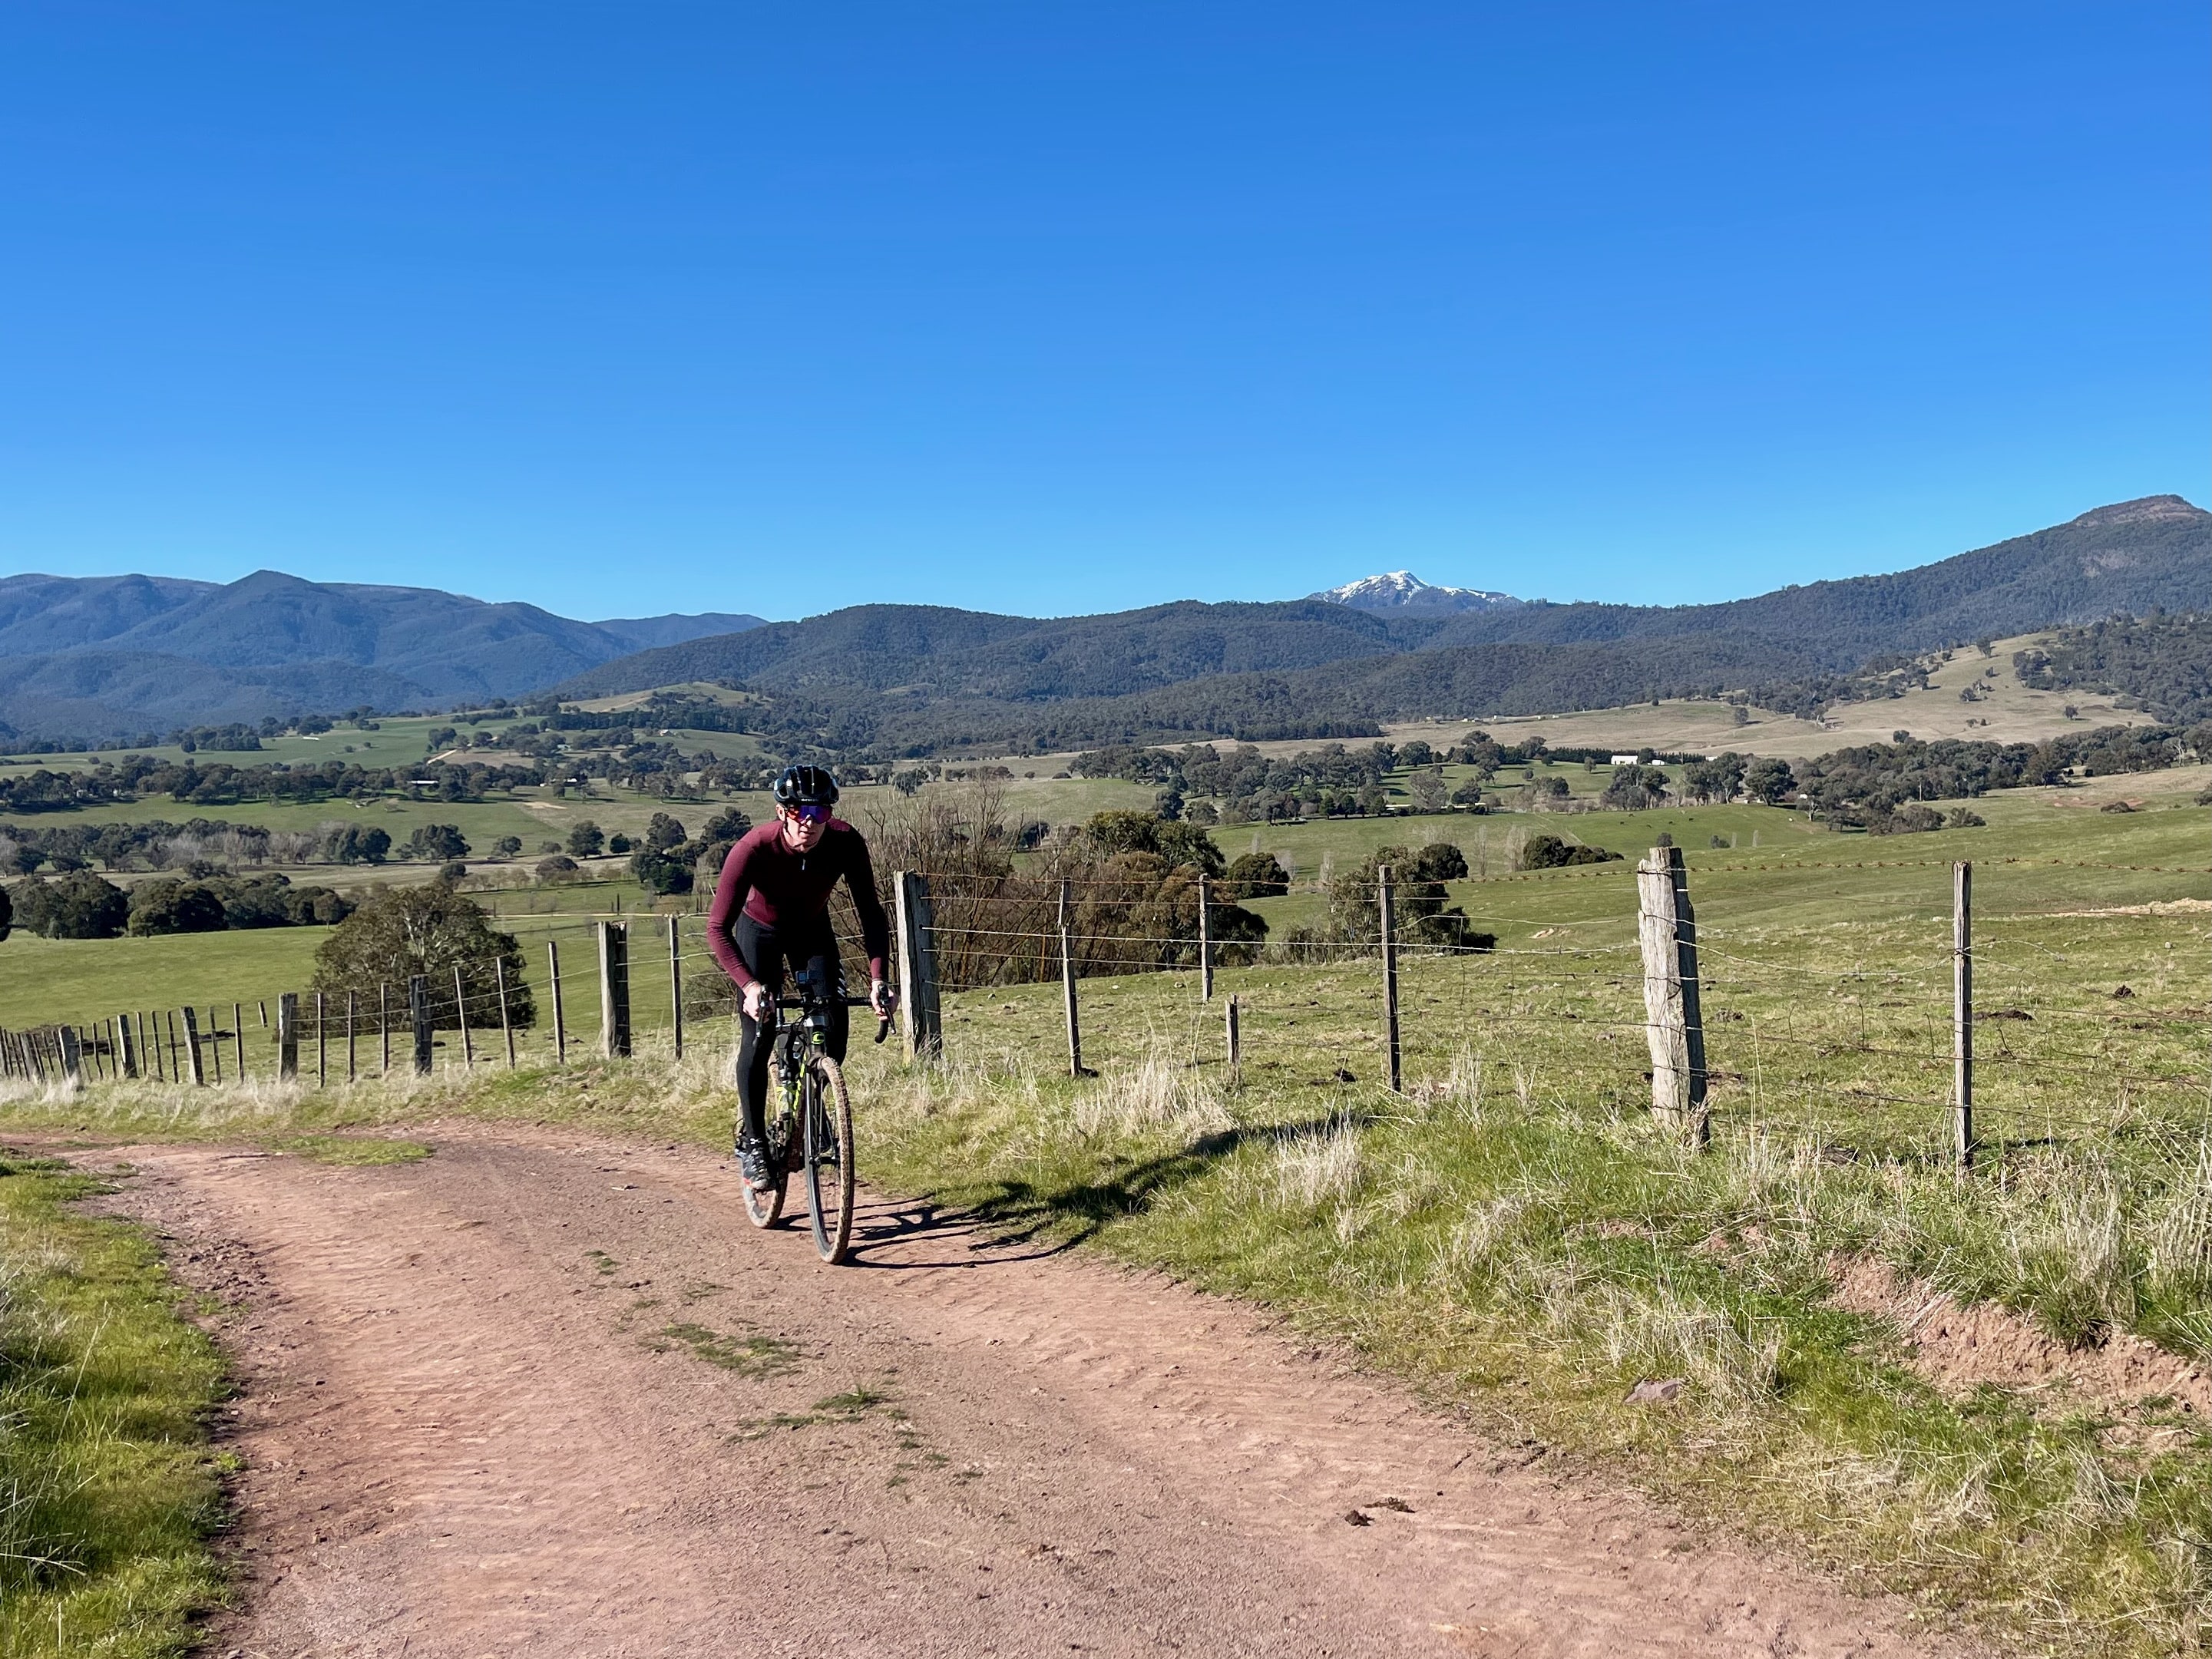 Cyclist climbing up a smooth gravel road with mountains in the background